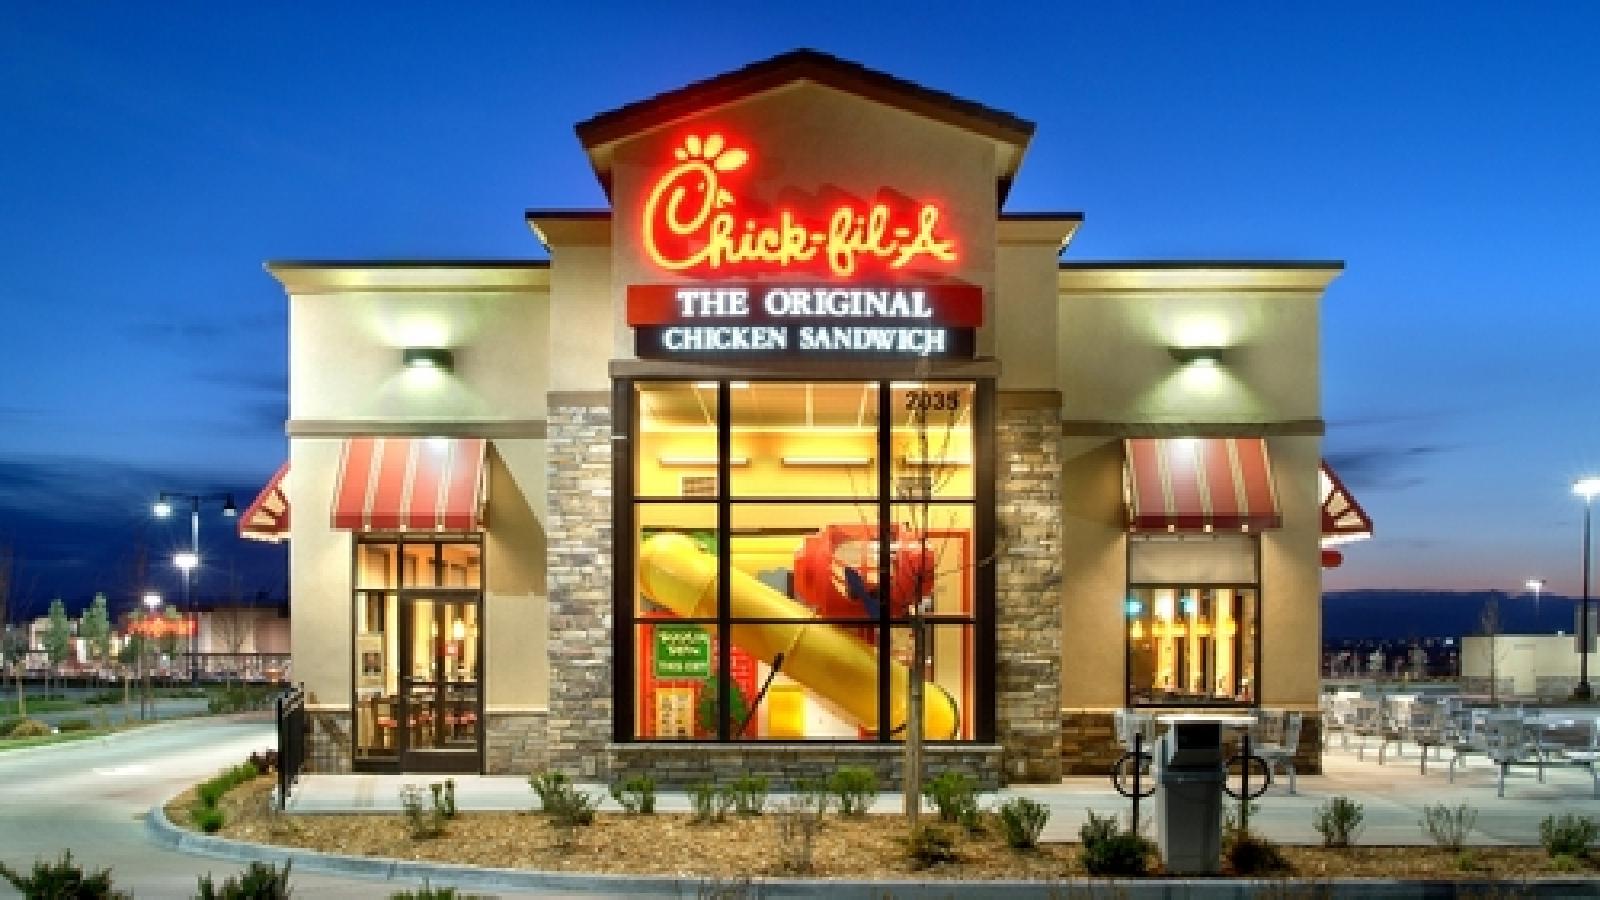 Image shows a Chick-fil-A restaurant.